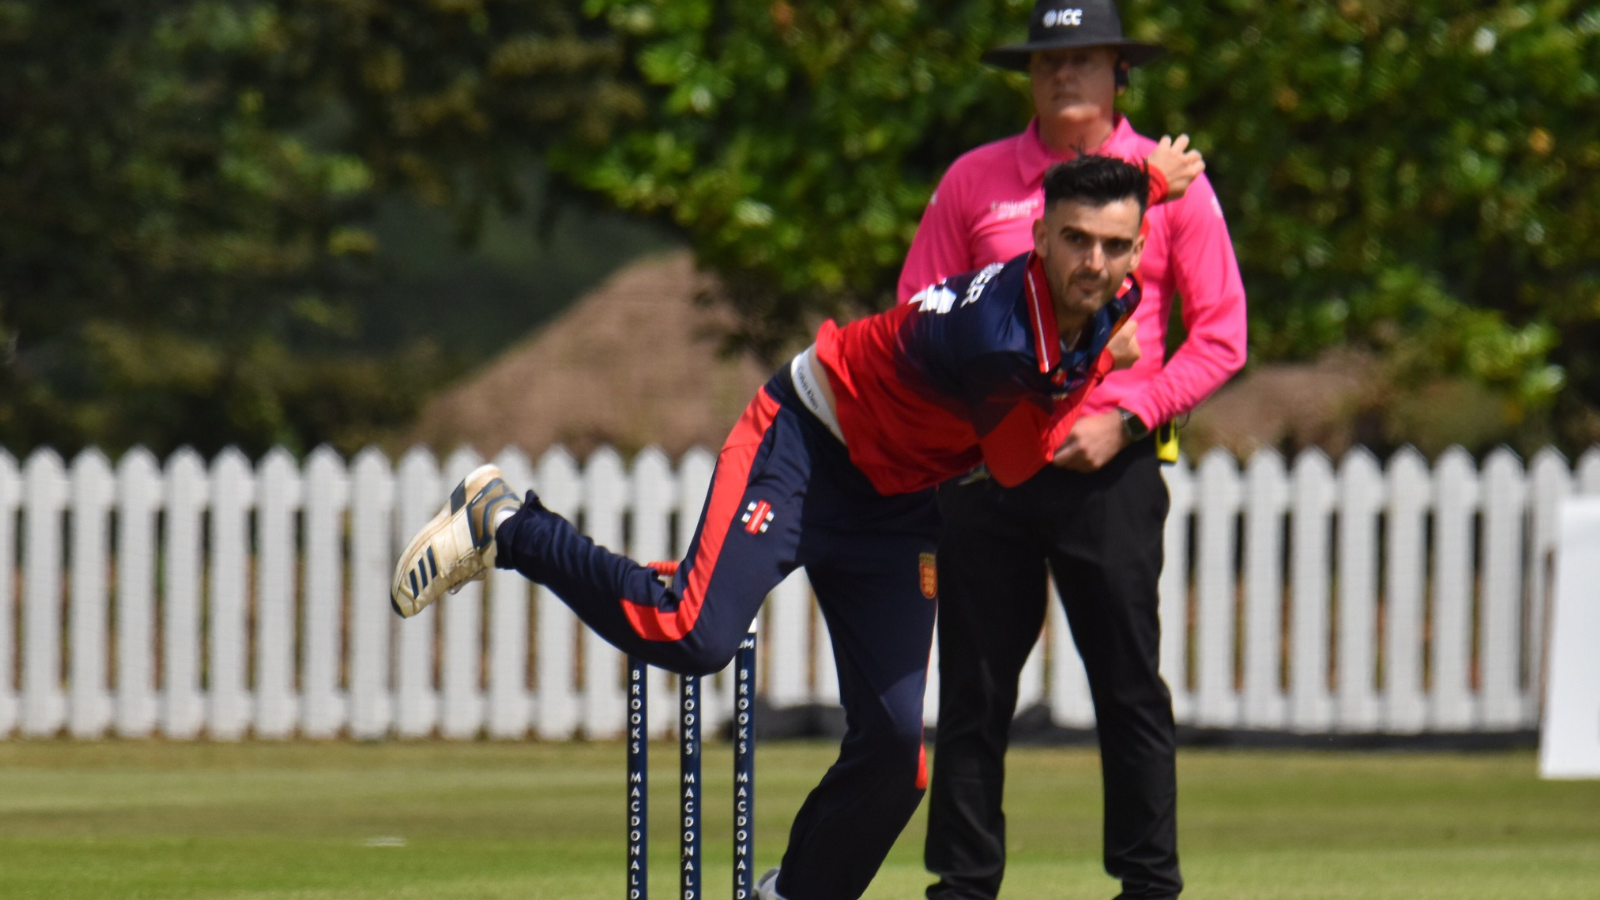 "Dynamic" Jersey set for T20 World Cup qualifier in Scotland